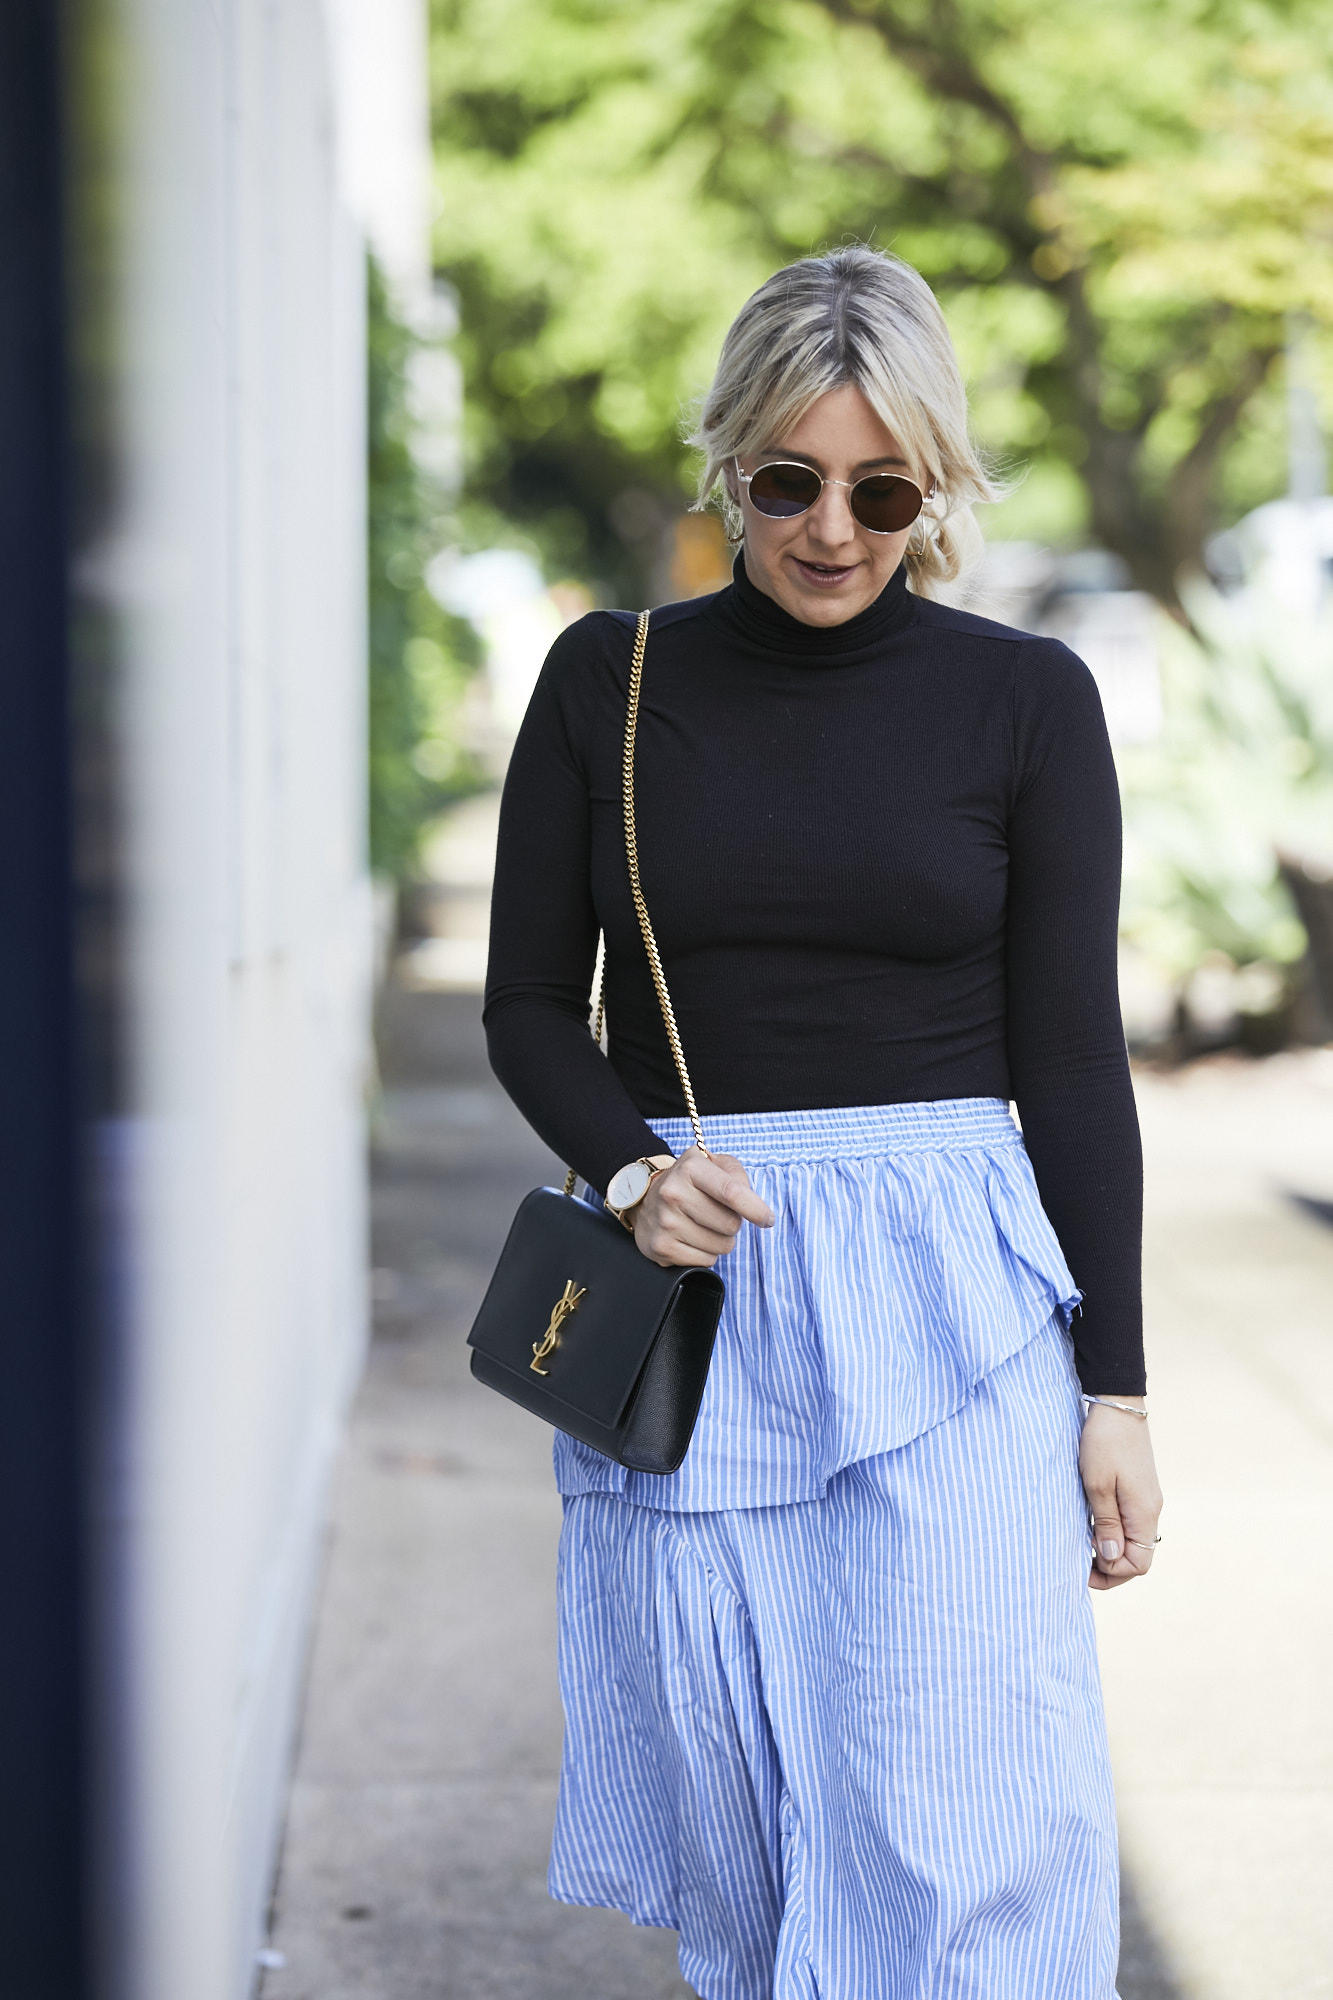 How To Wear A Ruffle Skirt